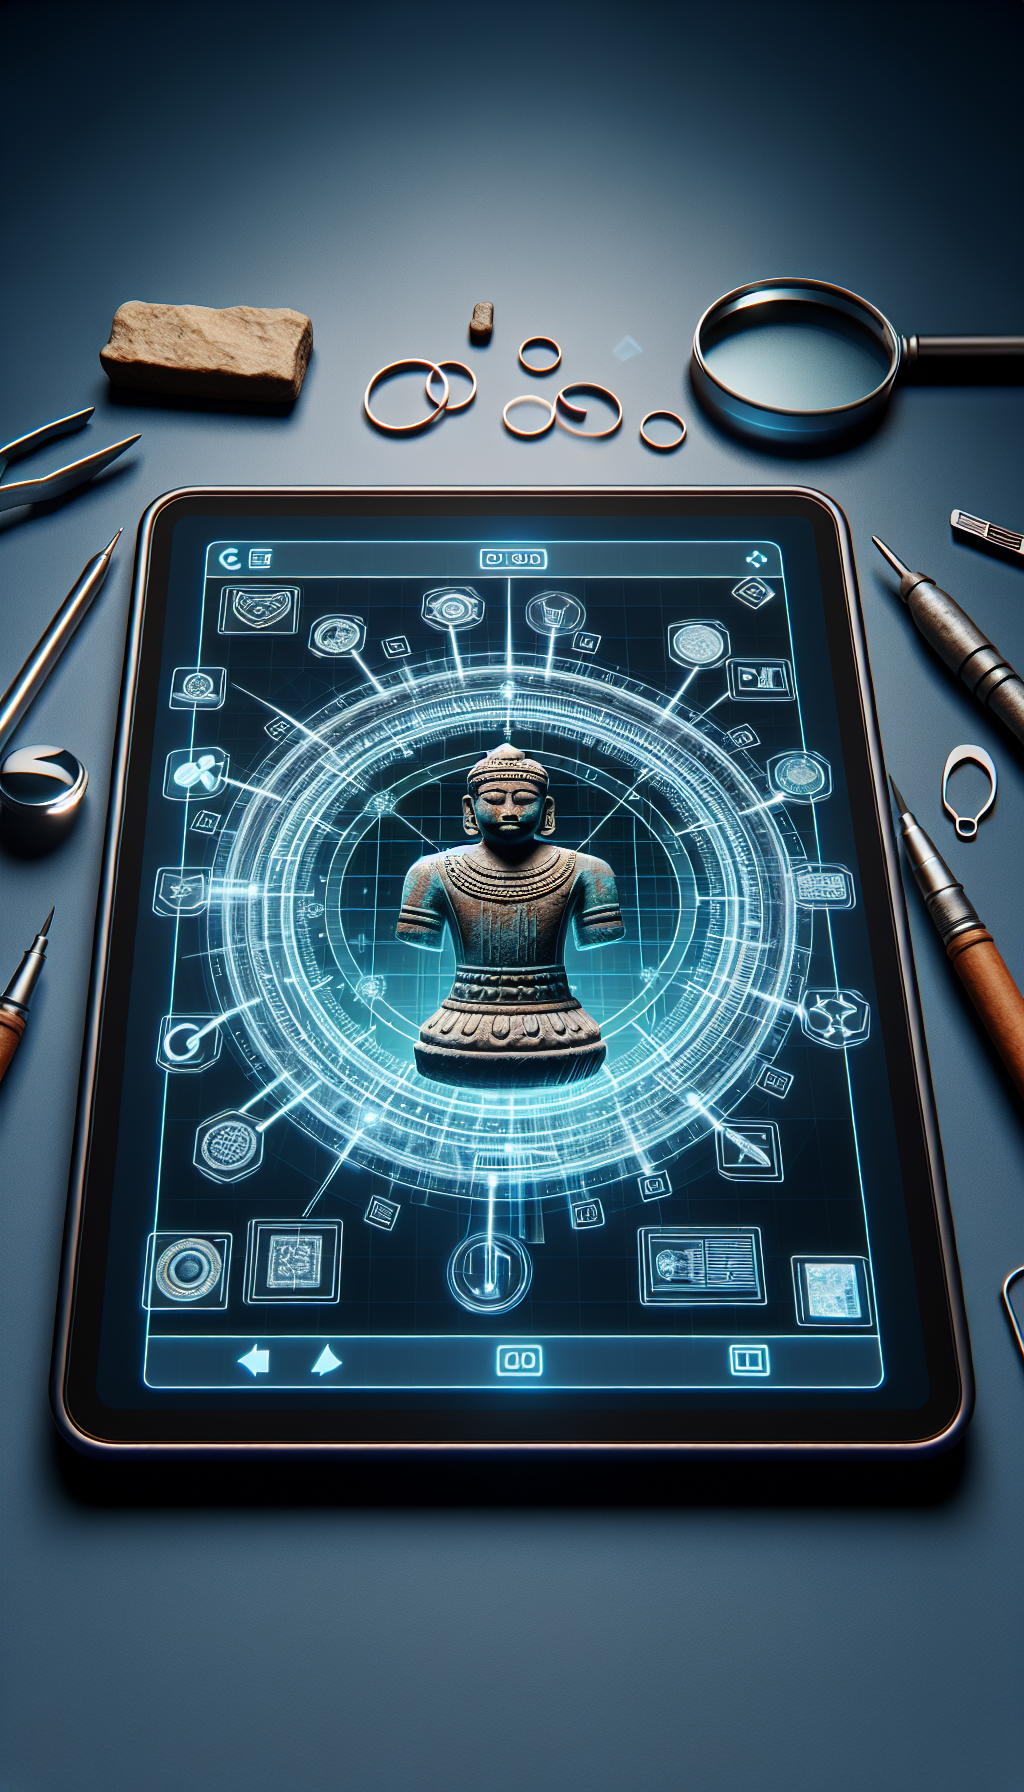 An evocative illustration depicts a digital tablet showcasing a 3D hologram of an ancient Indian artifact, with virtual tools and magnifying icons surrounding it, mimicking an archaeologist's workspace. The artifact's details are cross-referenced with an online database, revealing text bubbles with identification insights and valuation figures, fusing traditional archaeology with modern day technology's magic touch.